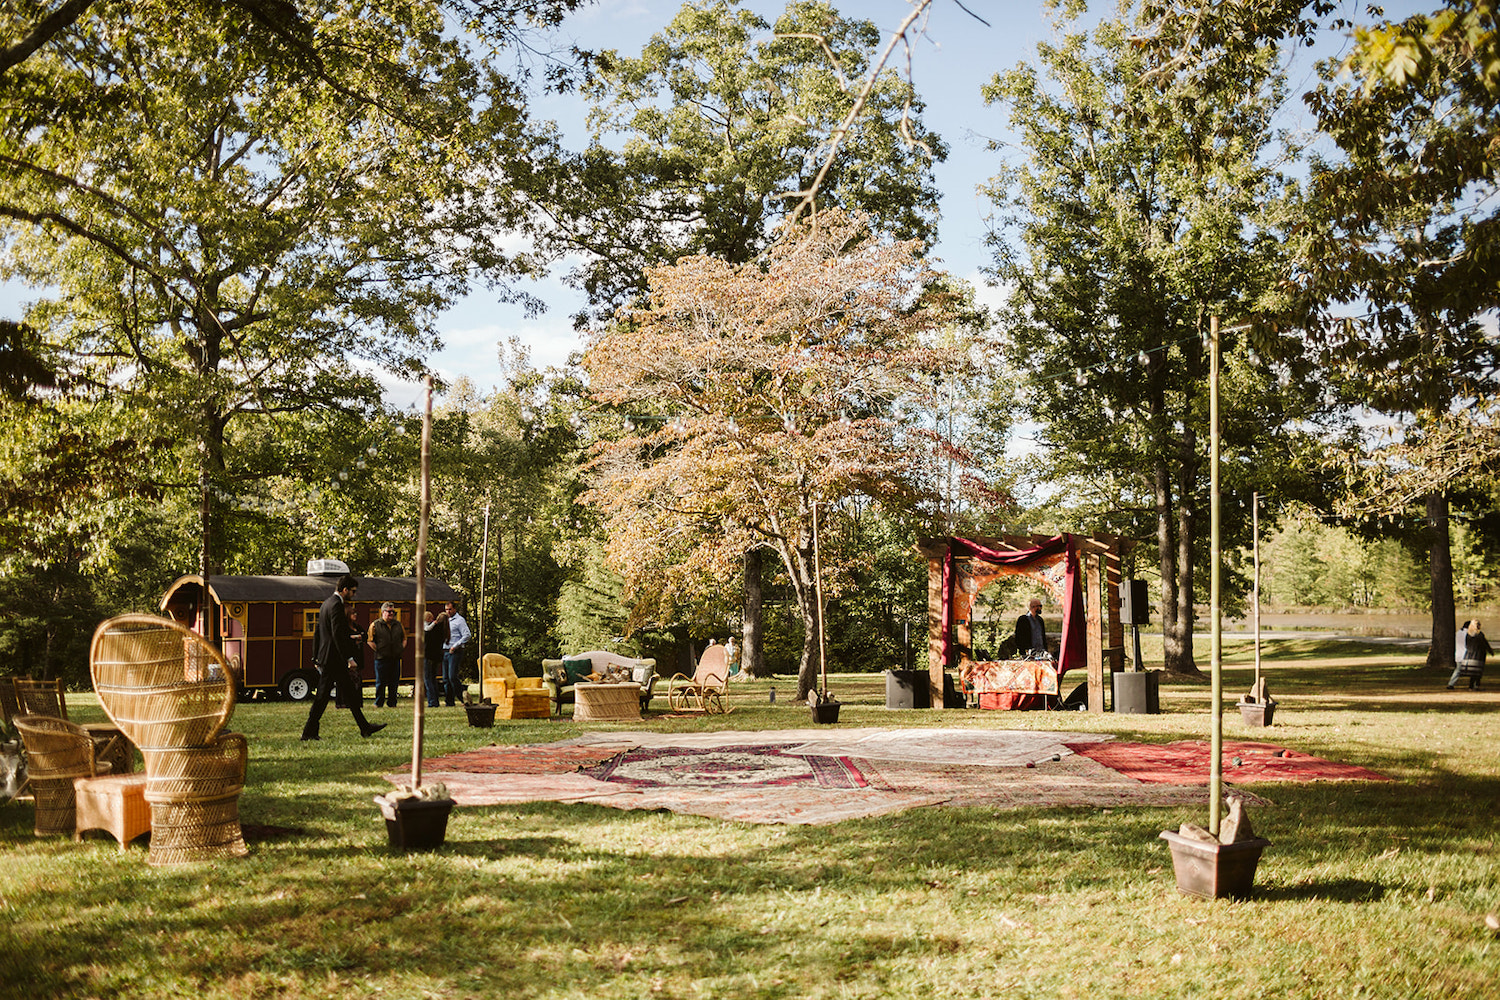 set up for Bohemian festival wedding with multiple Oriental rugs near gypsy wagon and wicker furniture sets